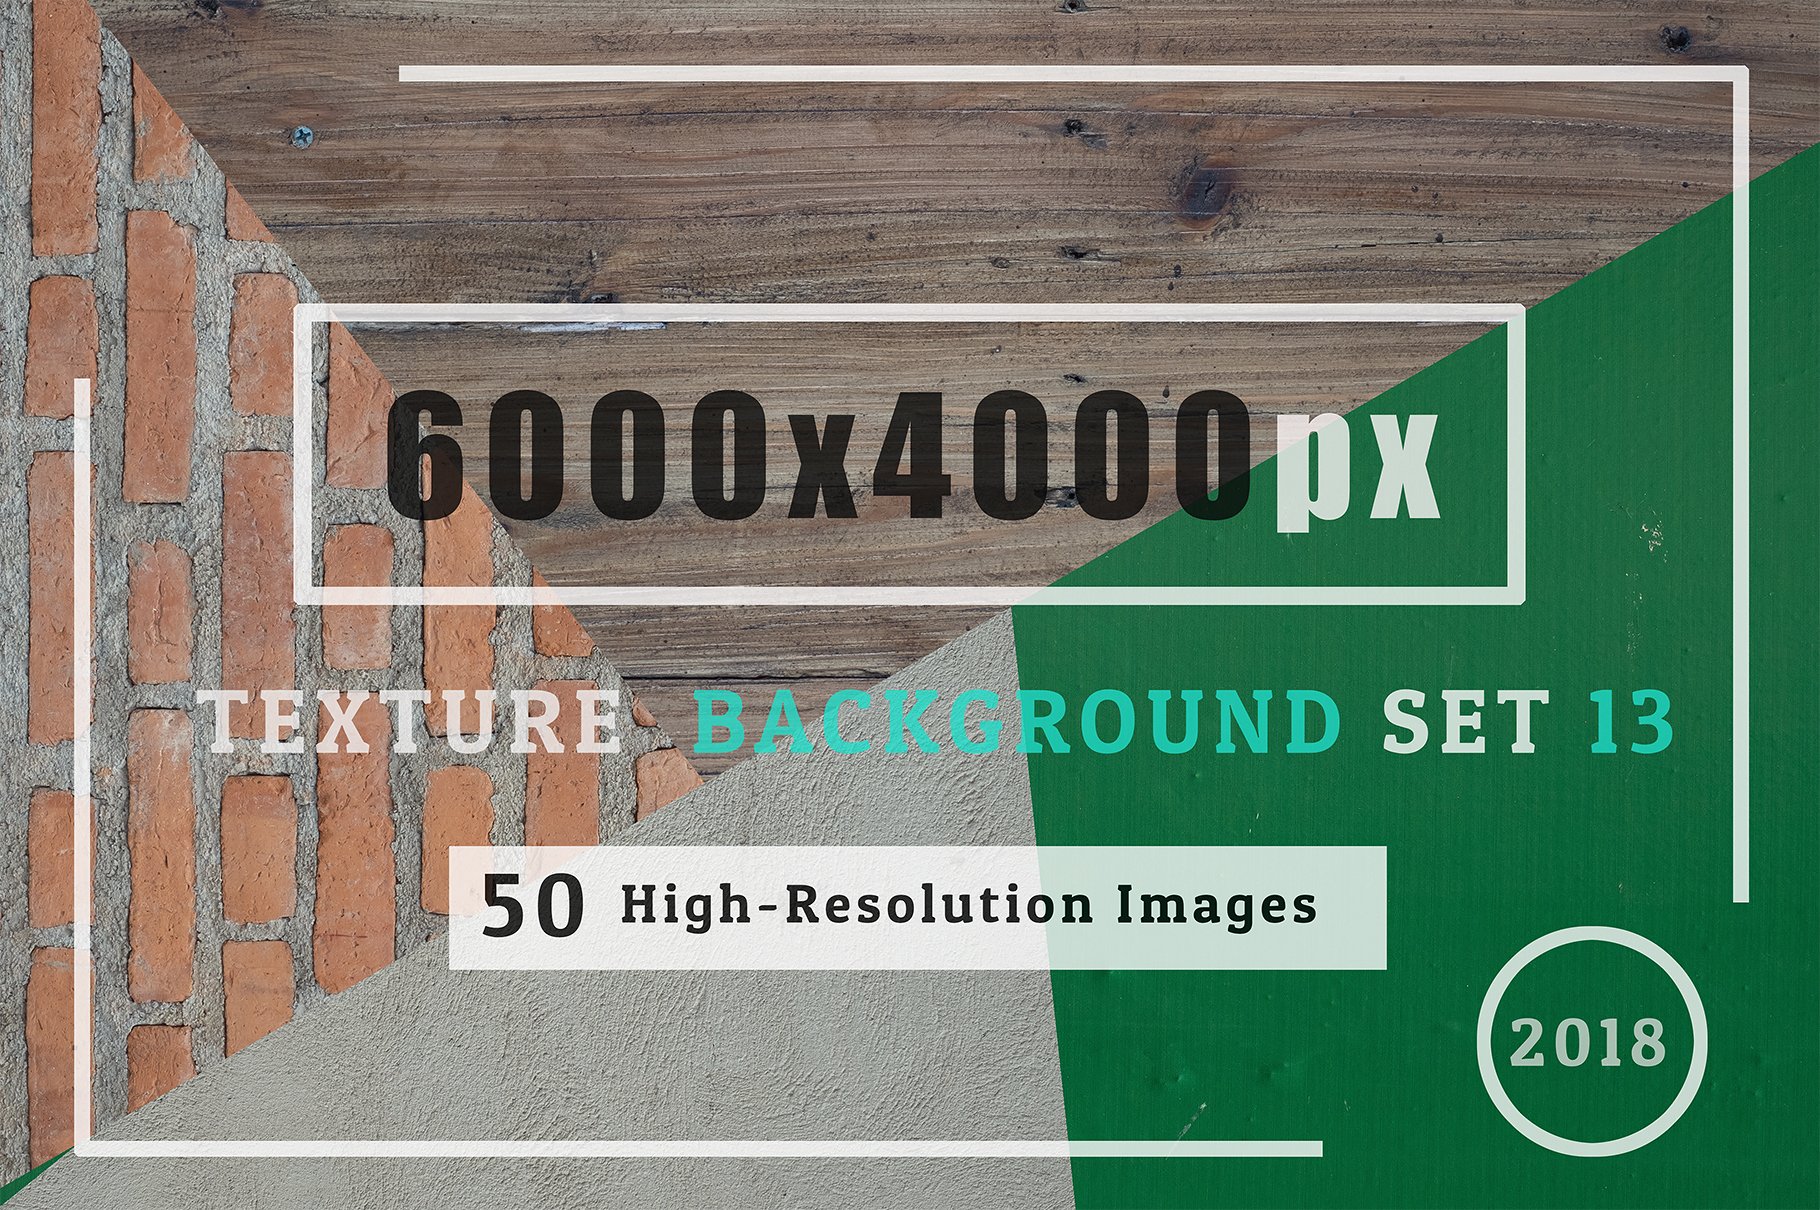 6000x4000px of 70 textures background set 13 562